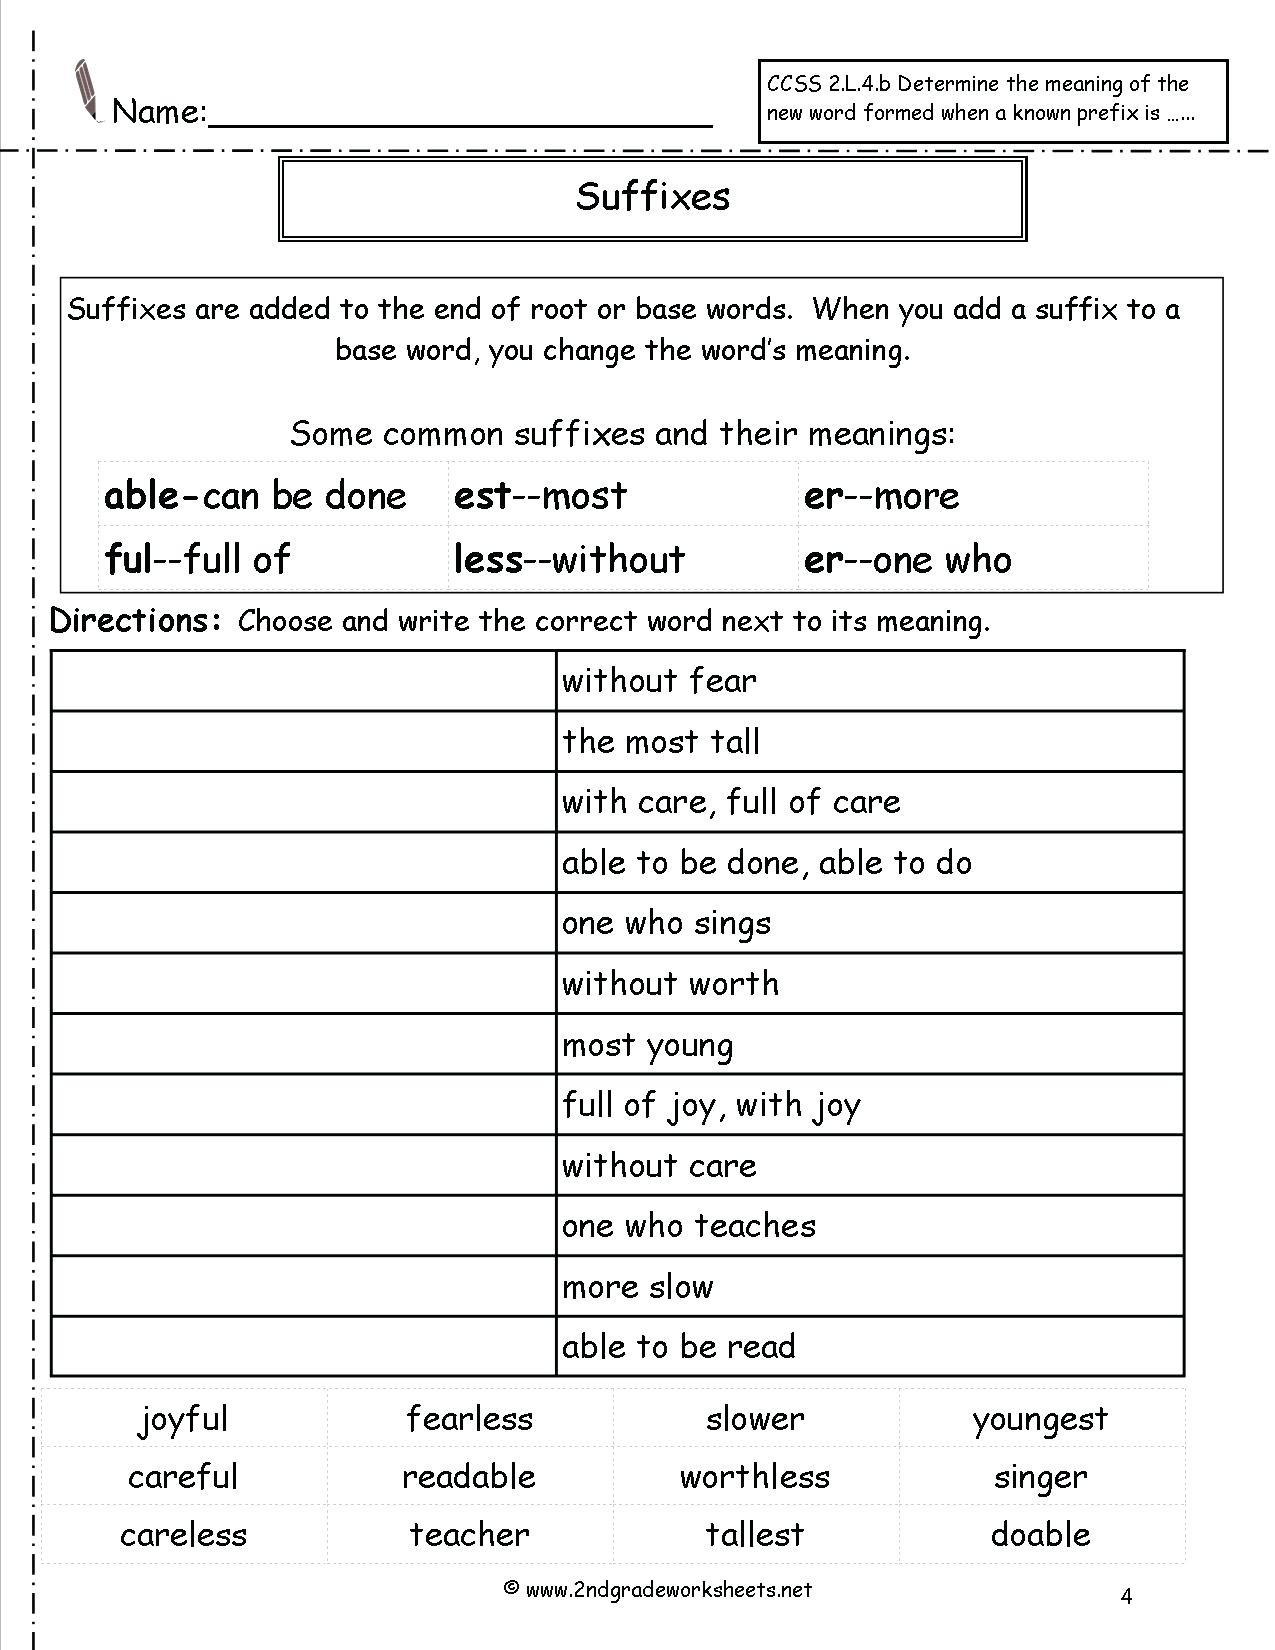 Suffixes Worksheets for 3rd Grade 3rd Grade Prefixes and Suffixes Worksheets Whats the Prefix